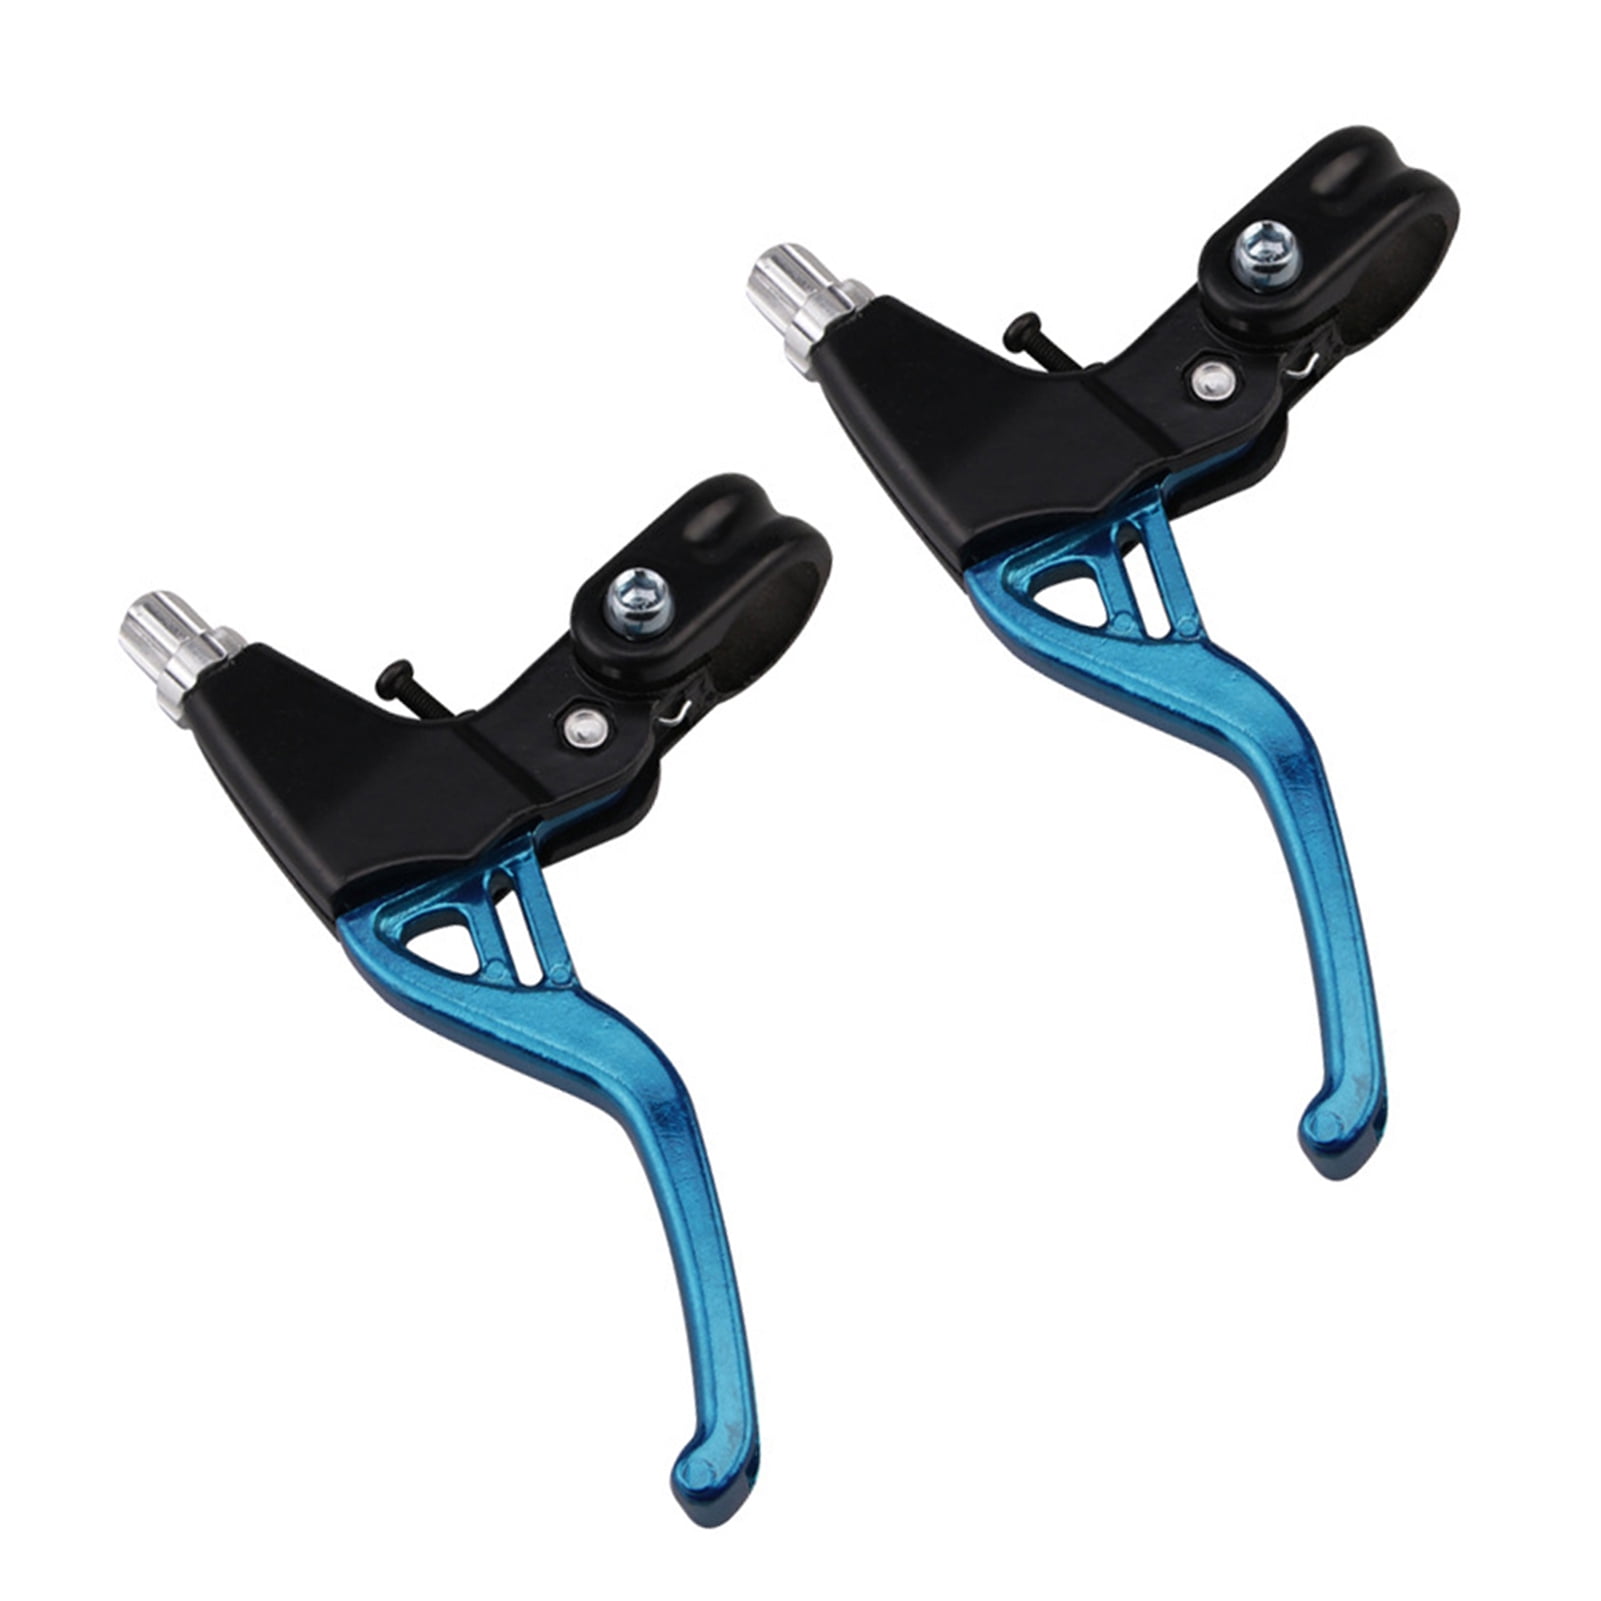 4 Colors:Red,Blue,Black,Silver Bicycle Brake Level,1 Pair Aluminium Alloy Mountain Bike Road Bicycle MTB Cycling Brake Level Handles 